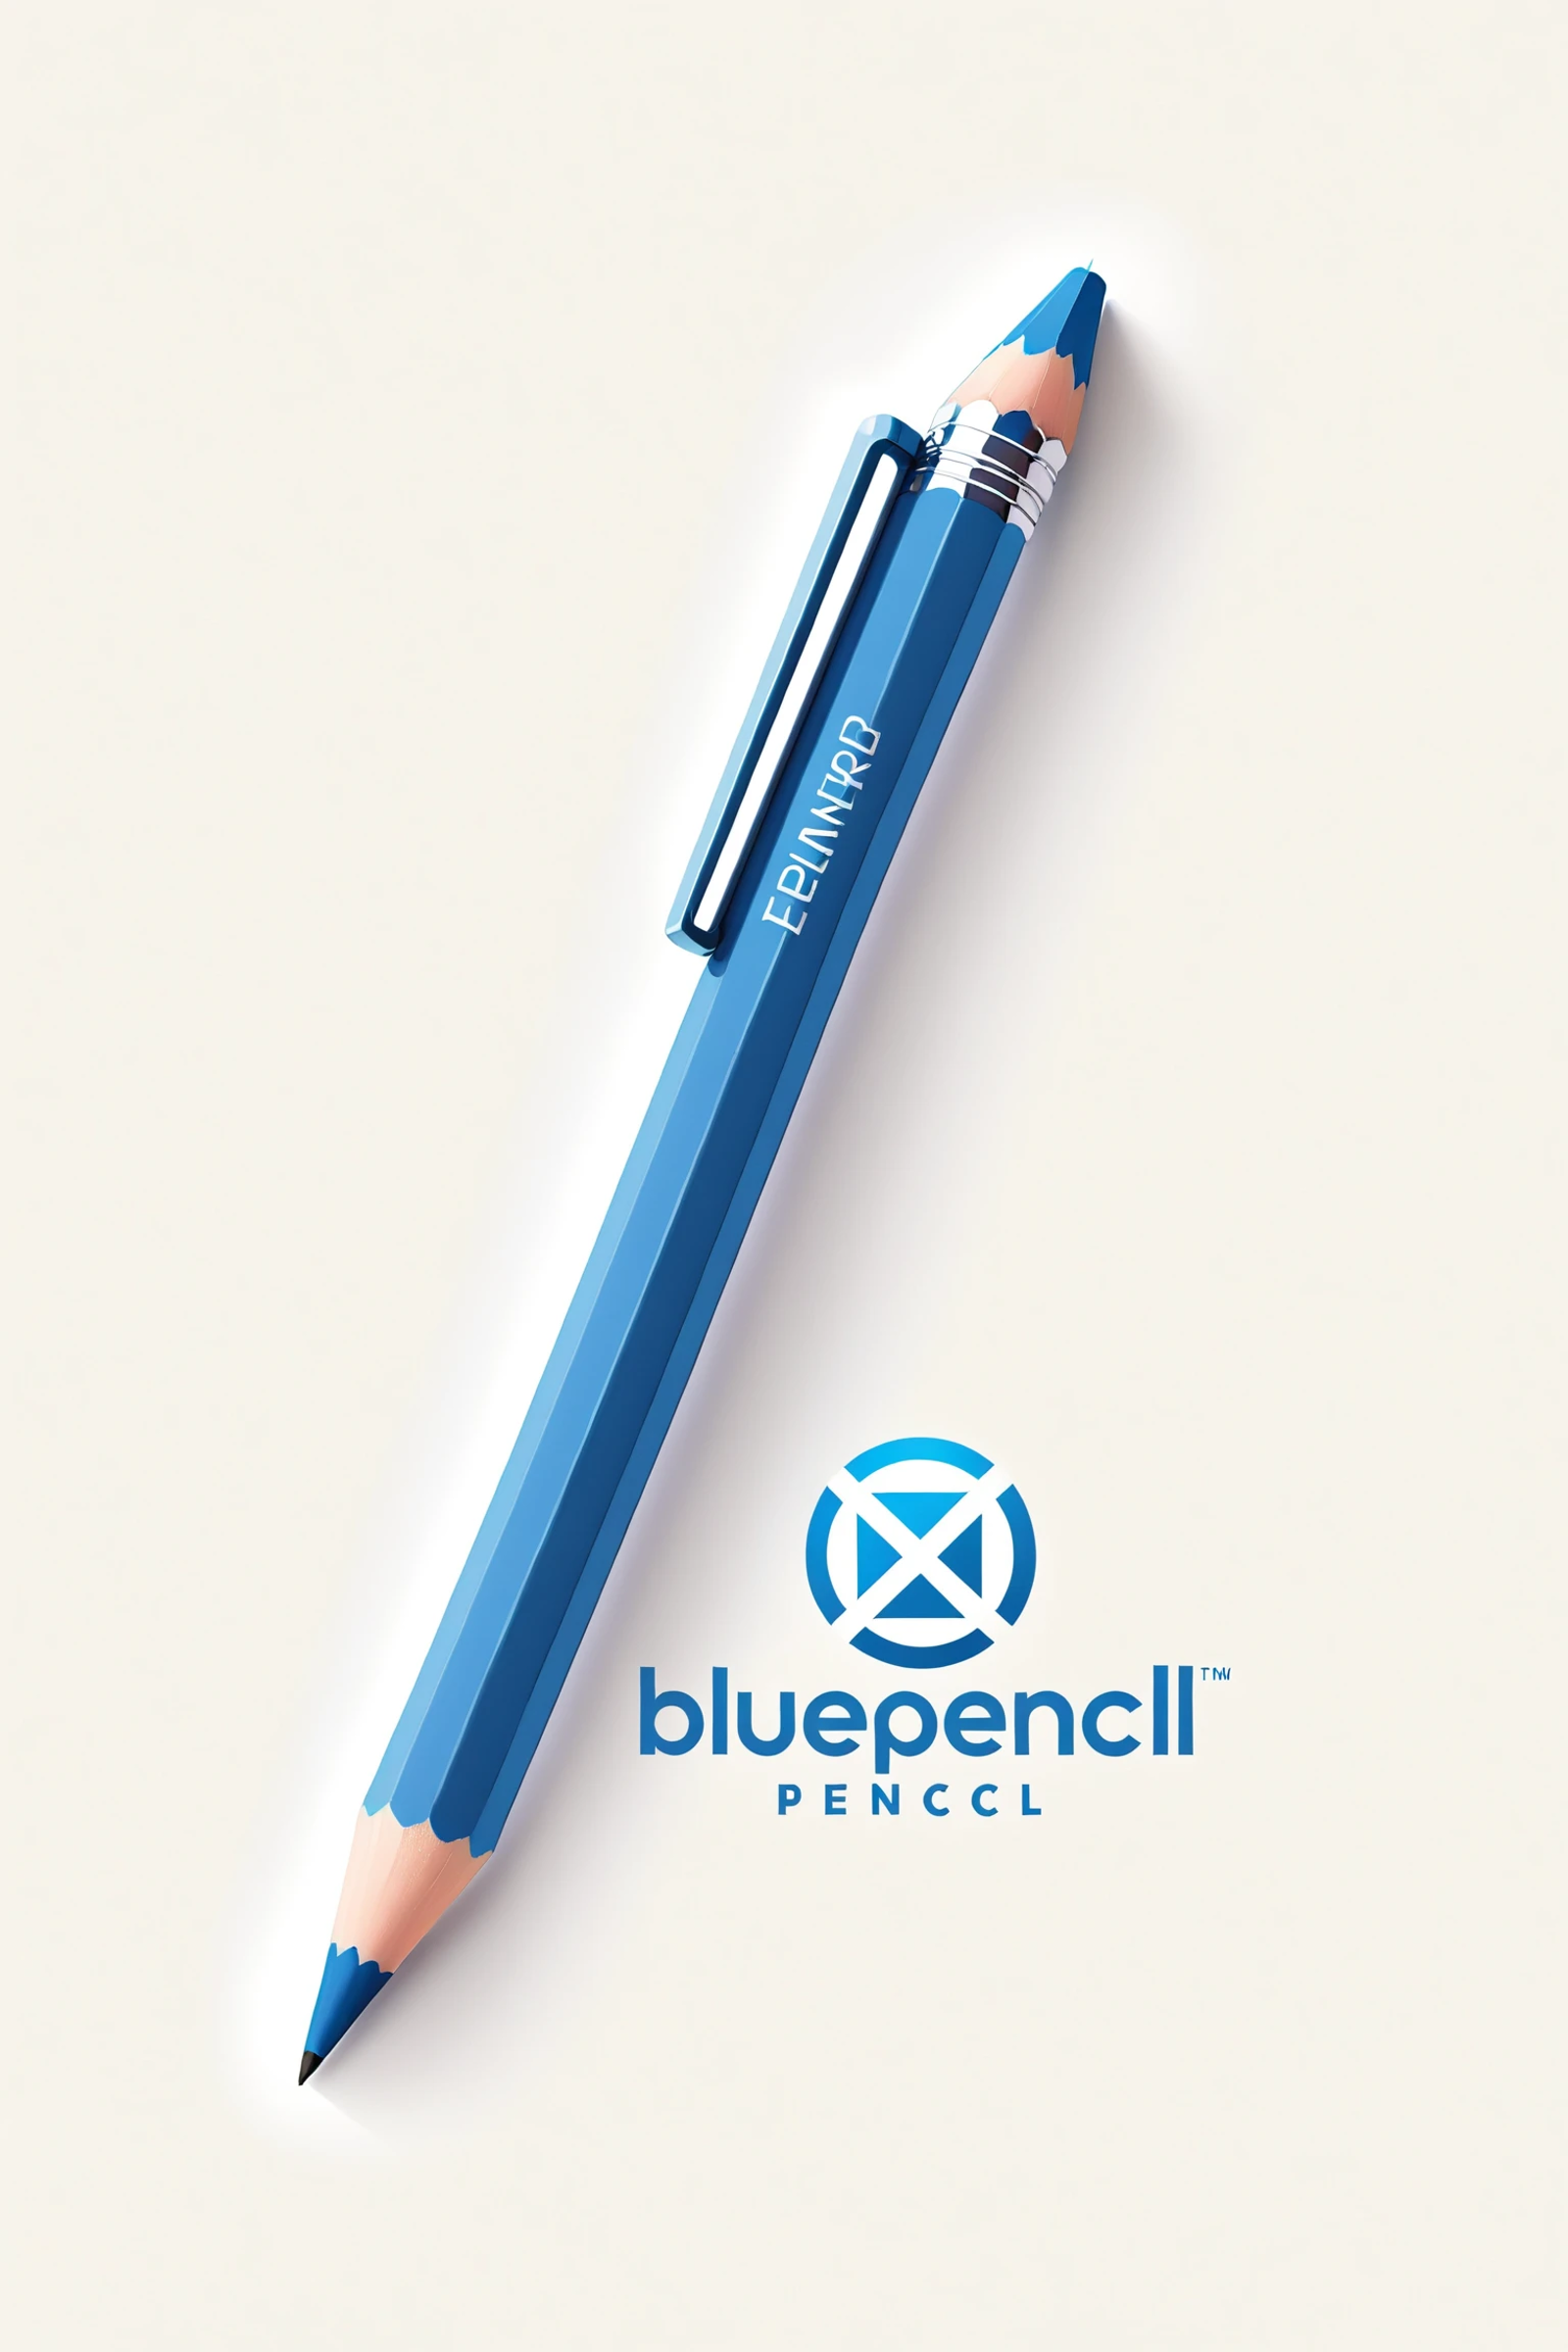 Bluepencil Pencil on a white background.